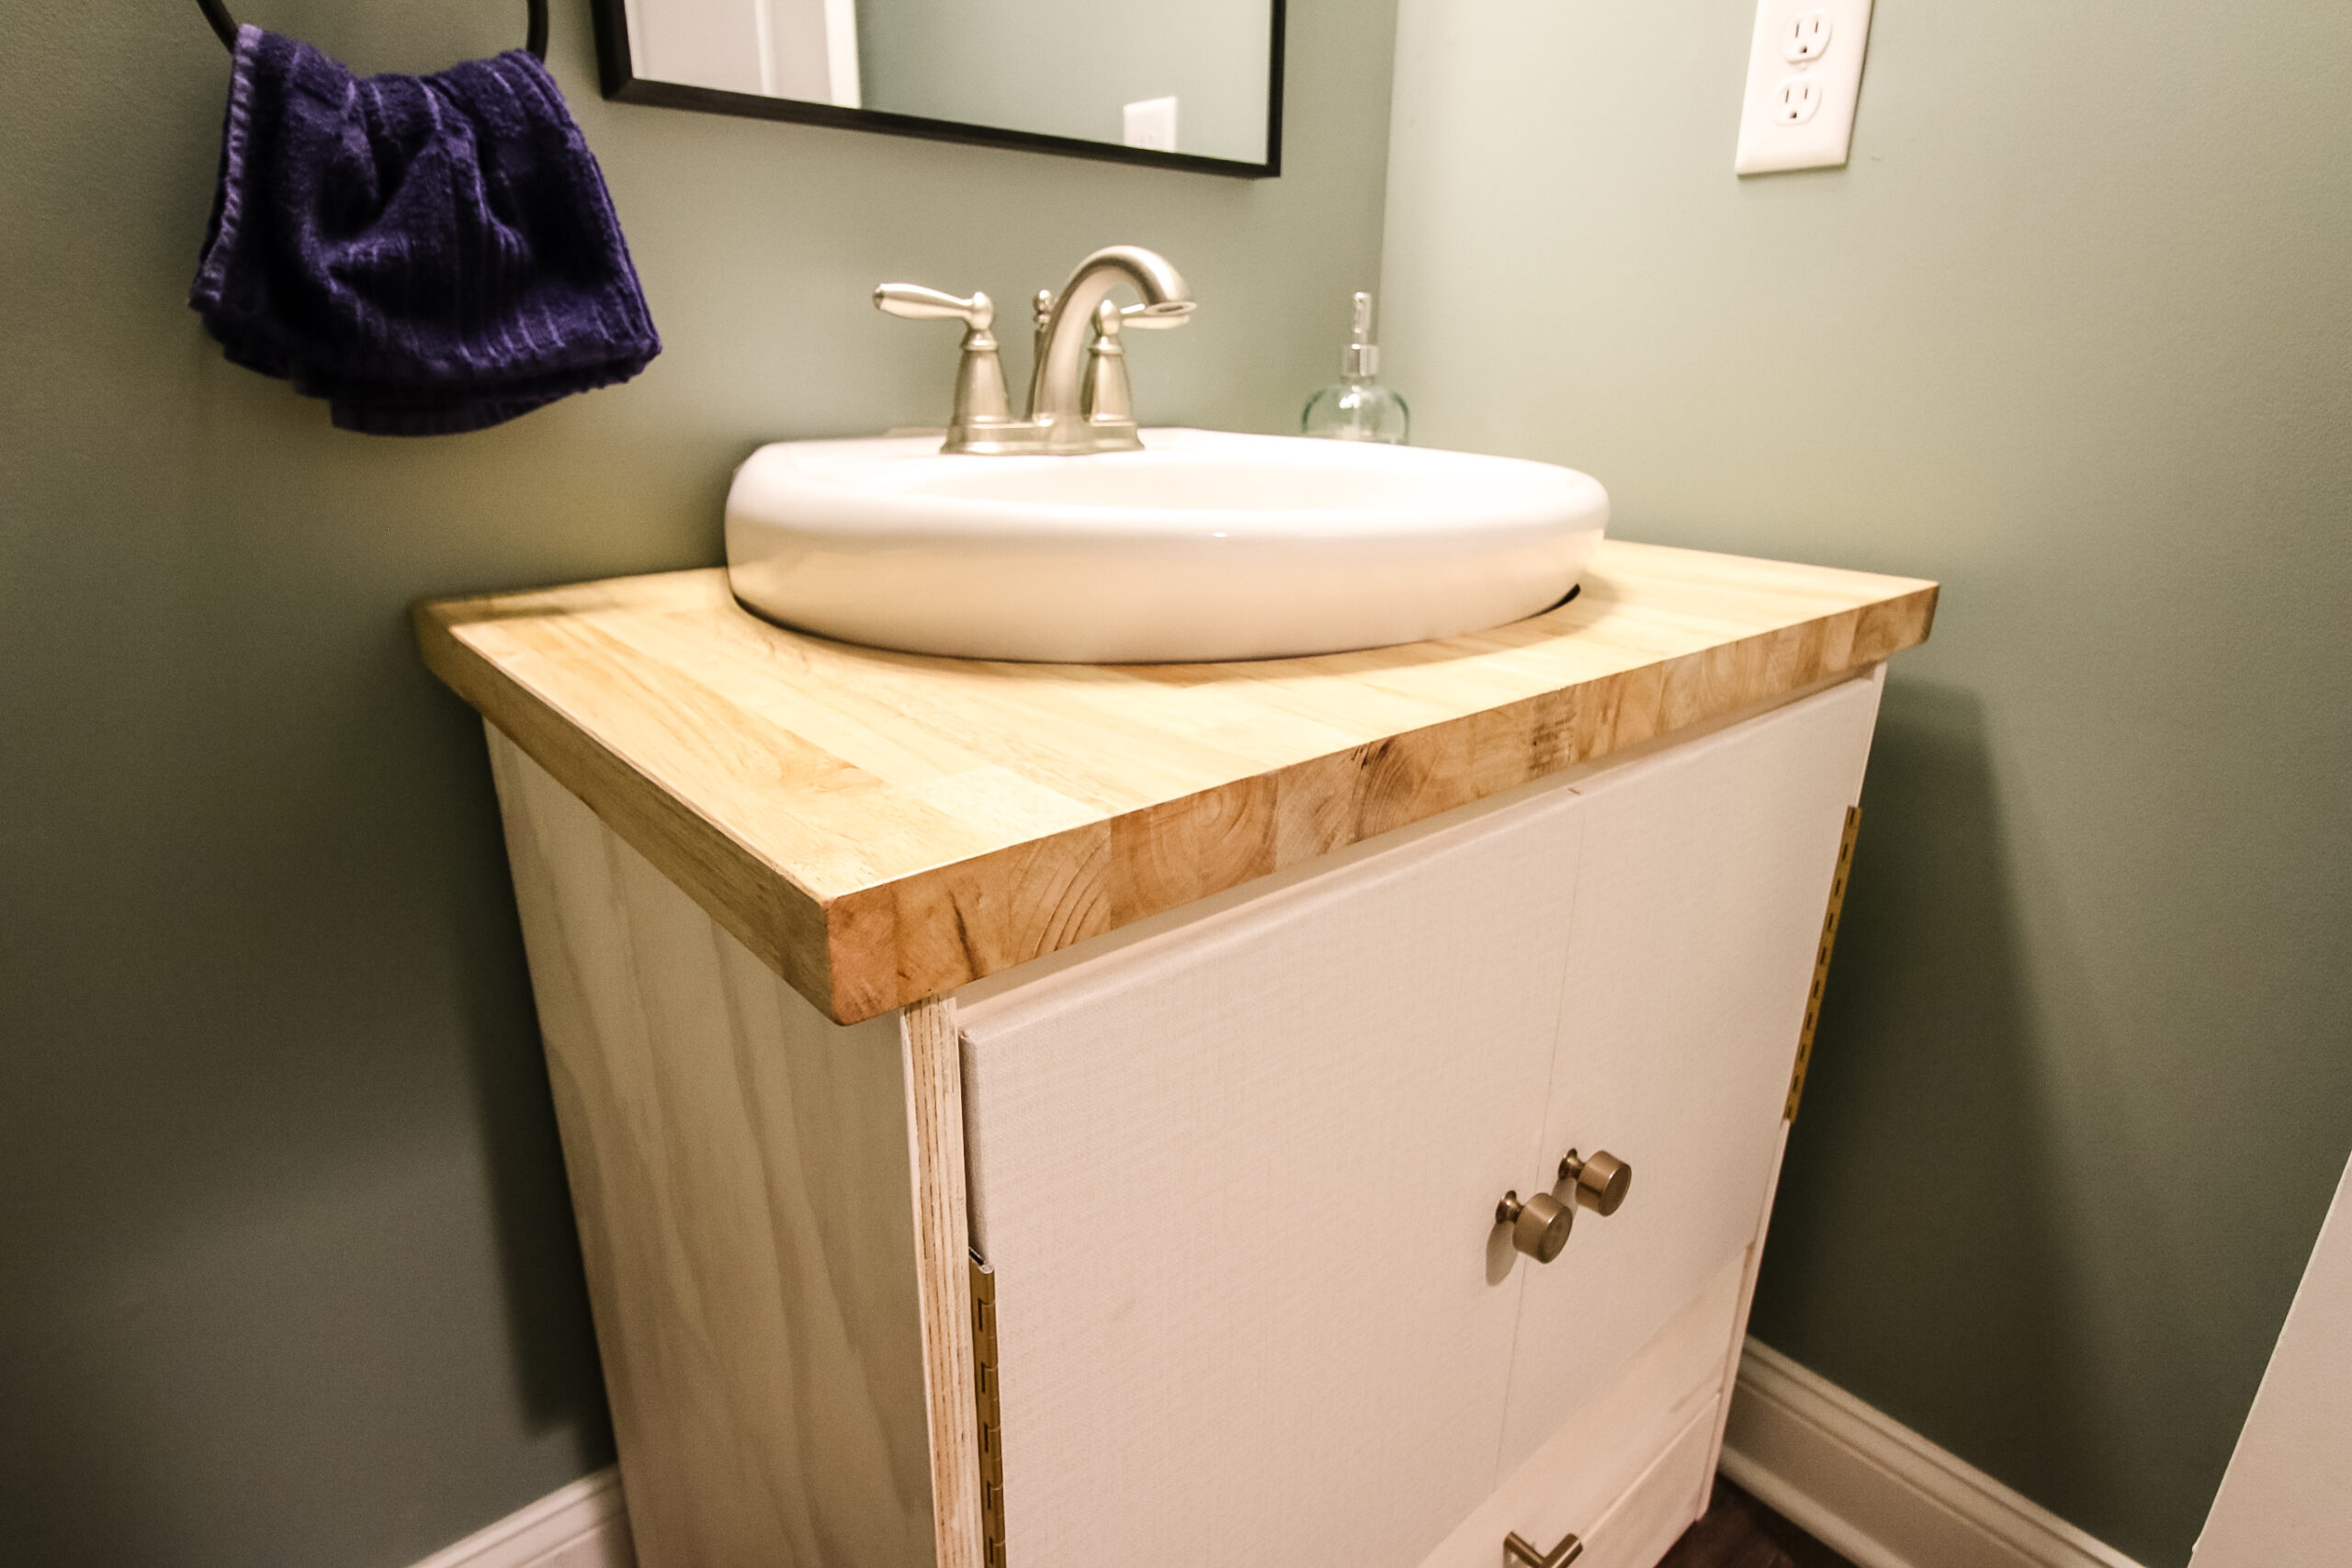 How To Build A Vanity For Pedestal Sink, Can You Build A Vanity Around Pedestal Sink